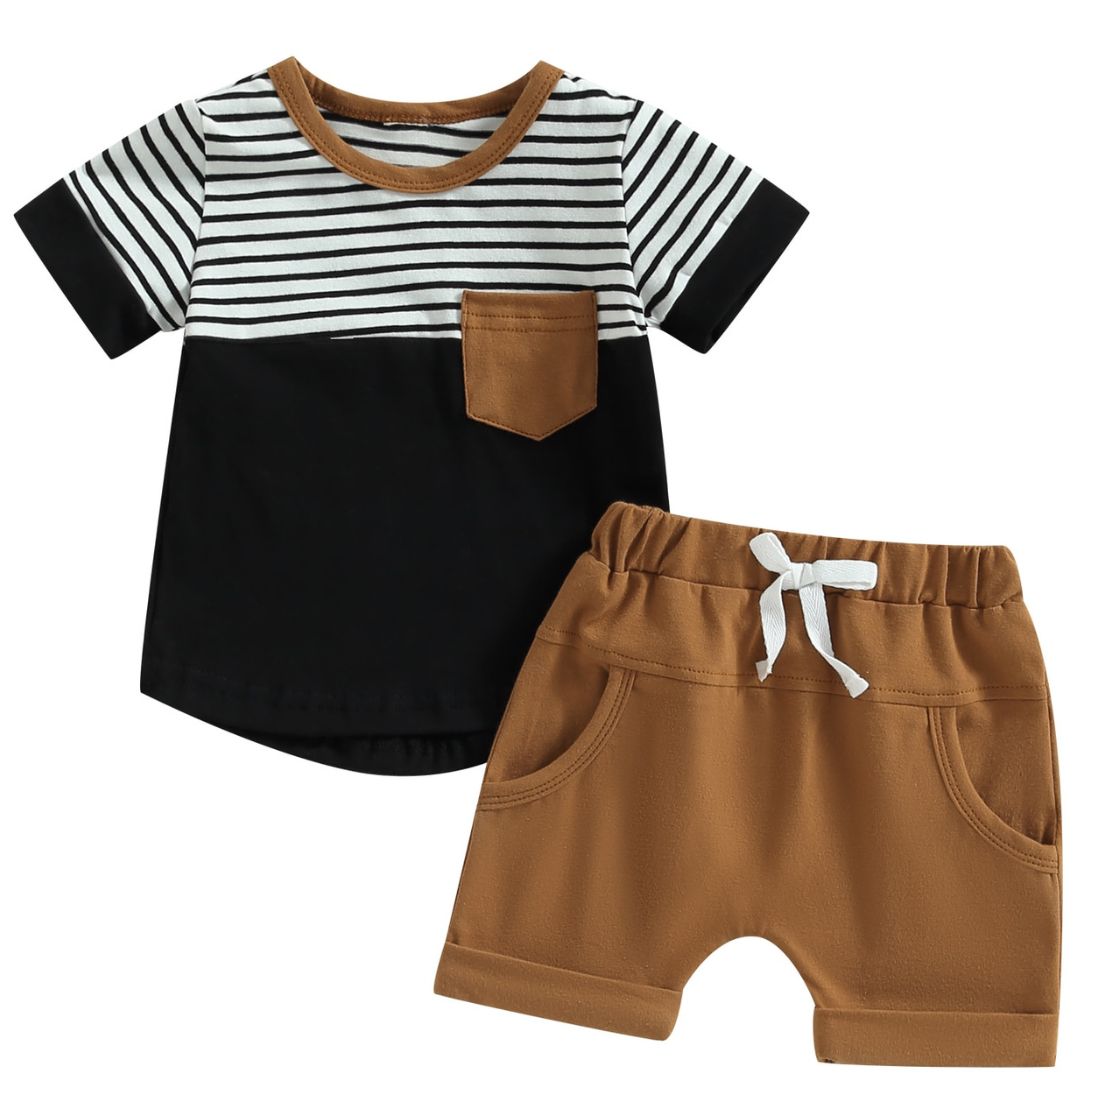 Earthy Stripes Baby Clothing Set